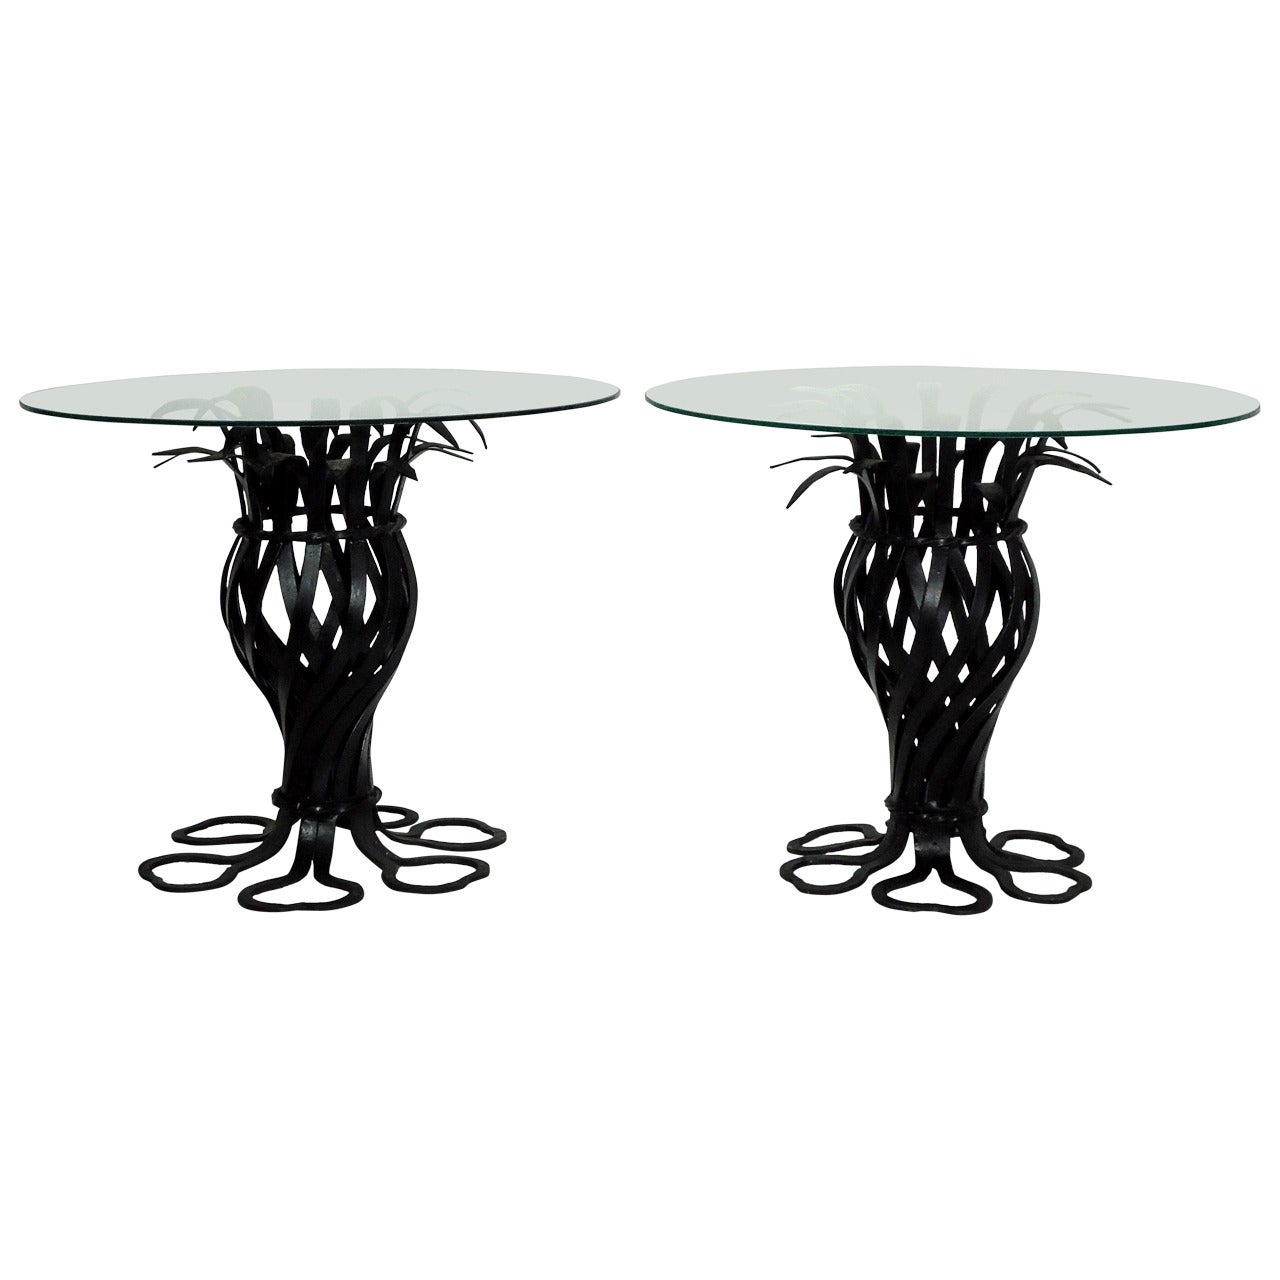 Salterini Style Pair of Woven Wrought Iron Pineapple End Tables, circa 1970 For Sale